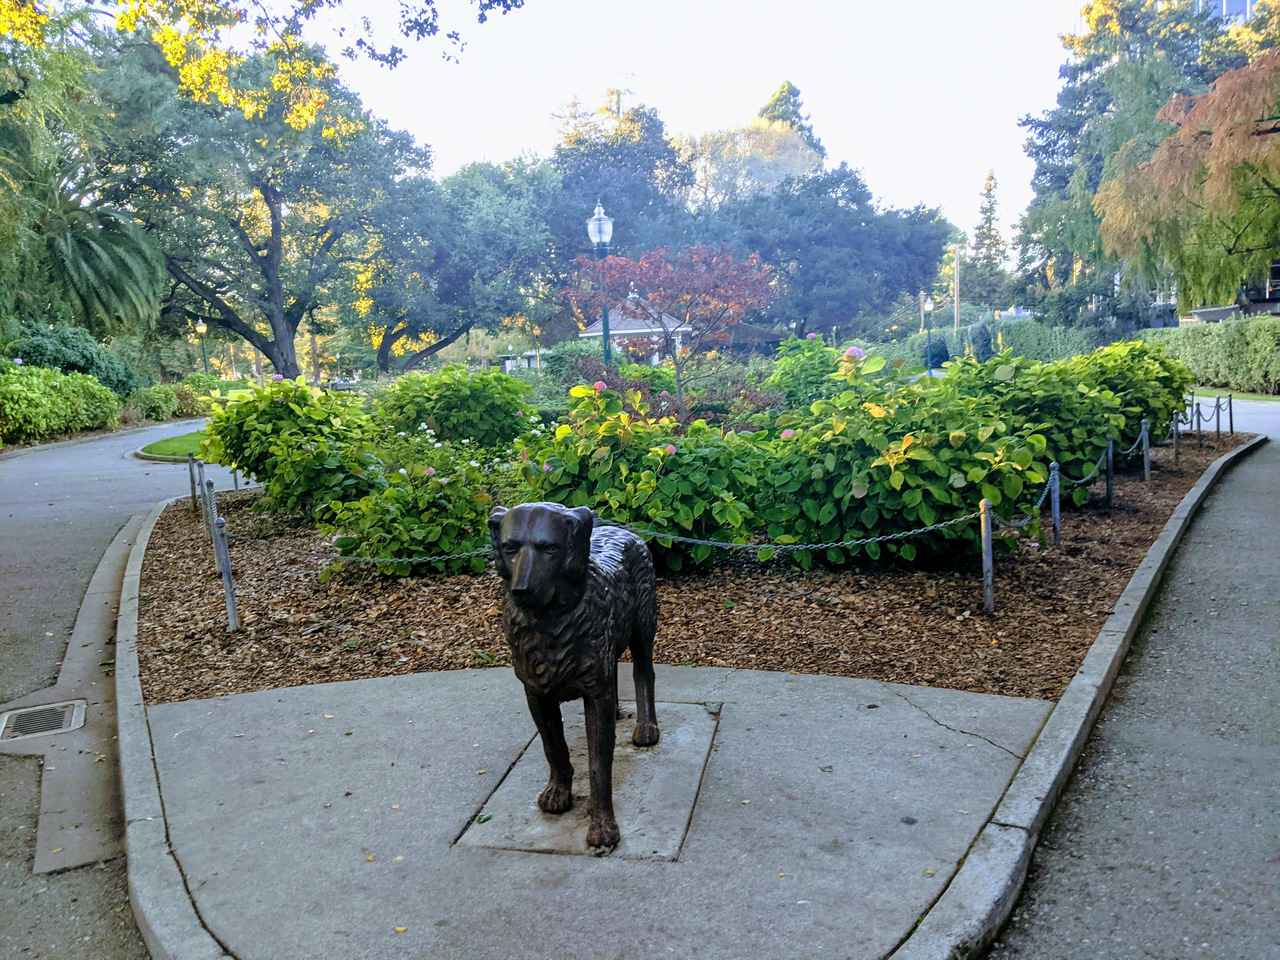 Doggy statue